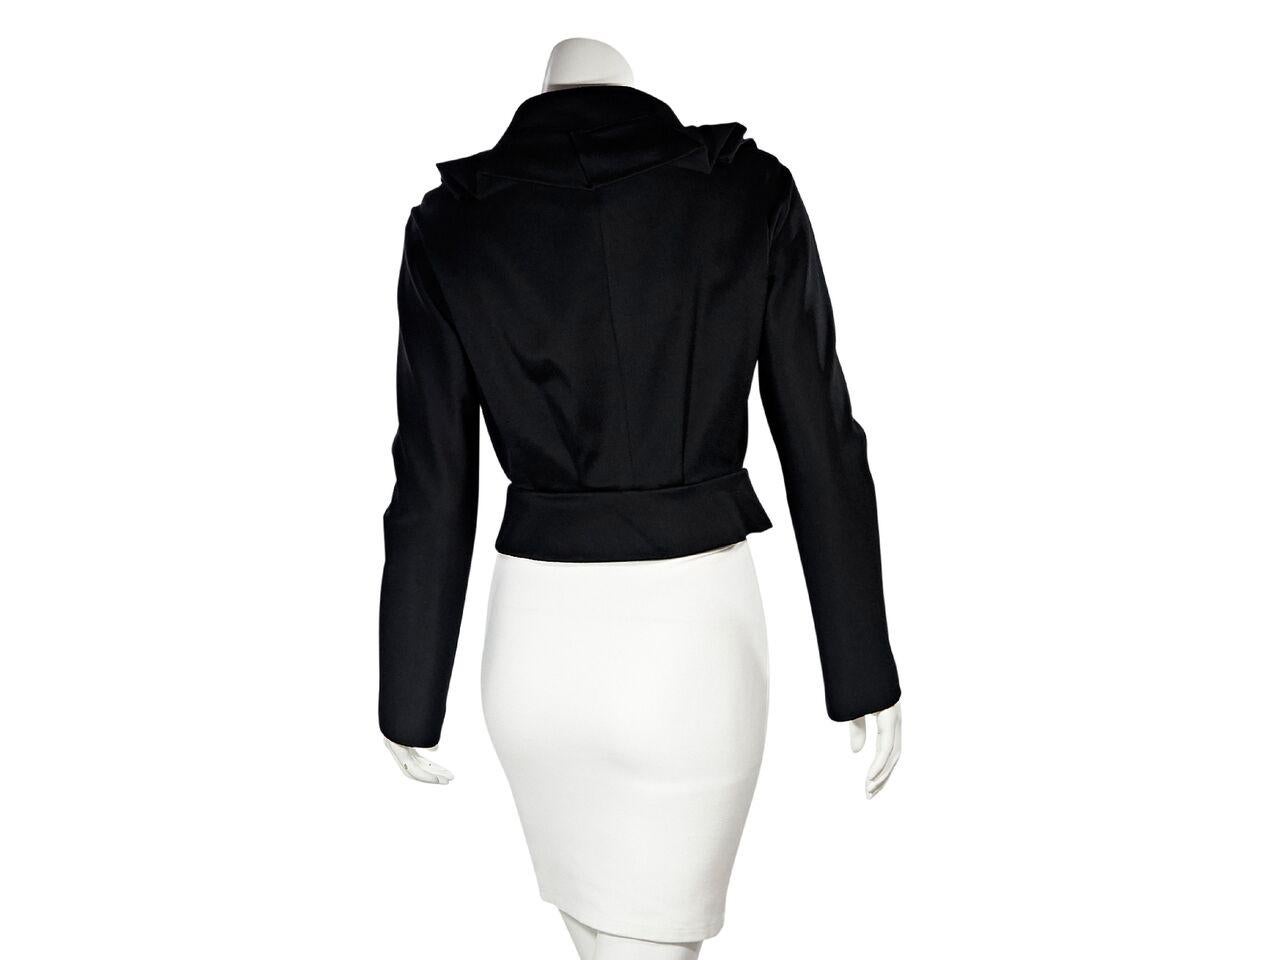 Product details:  Black fitted jacket by Balenciaga.  From the Nicholas Ghesquiere era.  Trimmed with ruffles.  Stand collar.  Long sleeves.  Concealed zip-front closure.  34